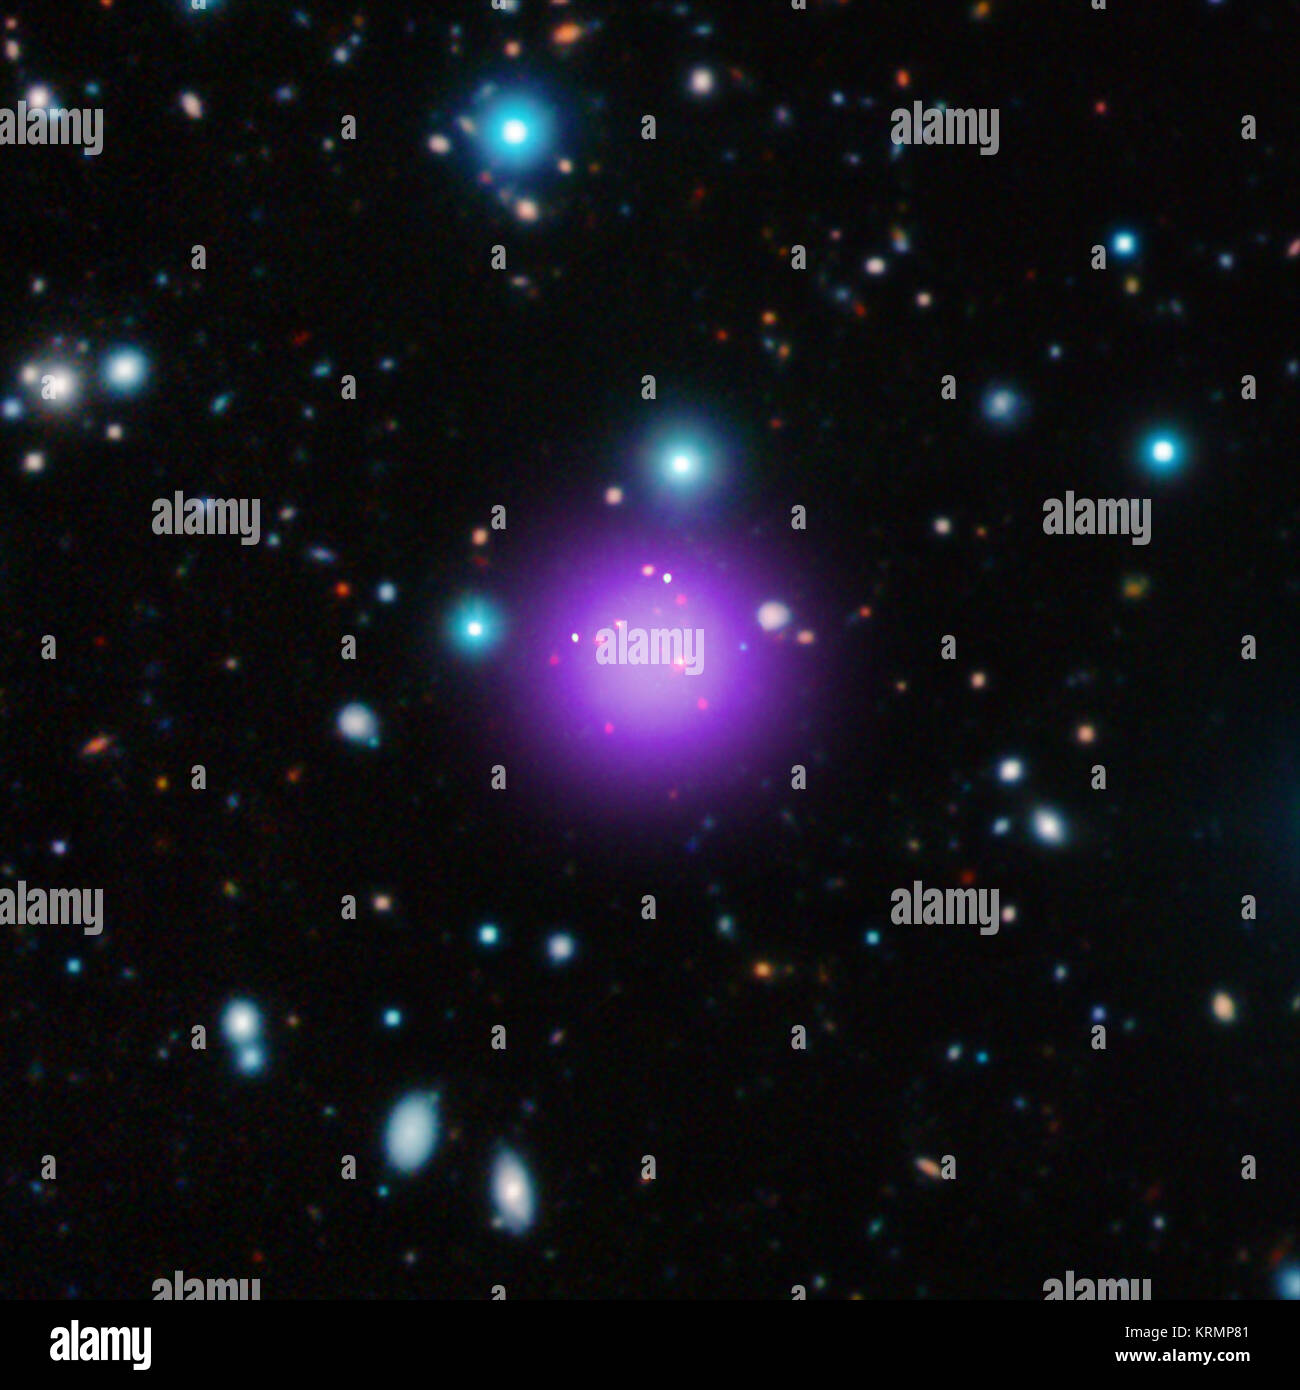 The galaxy cluster CL J1001+0220 is the most distant galaxy cluster ever discovered and may have been caught right after birth, a brief, but important stage of cluster evolution never seen before. This composite shows CL J1001+0220 in X-rays from Chandra (purple), infrared data from the UltraVISTA telescope (red, green, and blue), and radio waves from ALMA (green). The discovery of this object pushes back the formation time of galaxy clusters - the largest structures in the Universe held together by gravity - by about 700 million years. Composite X-Ray Radio and Infrared of galaxy cluster CL J Stock Photo